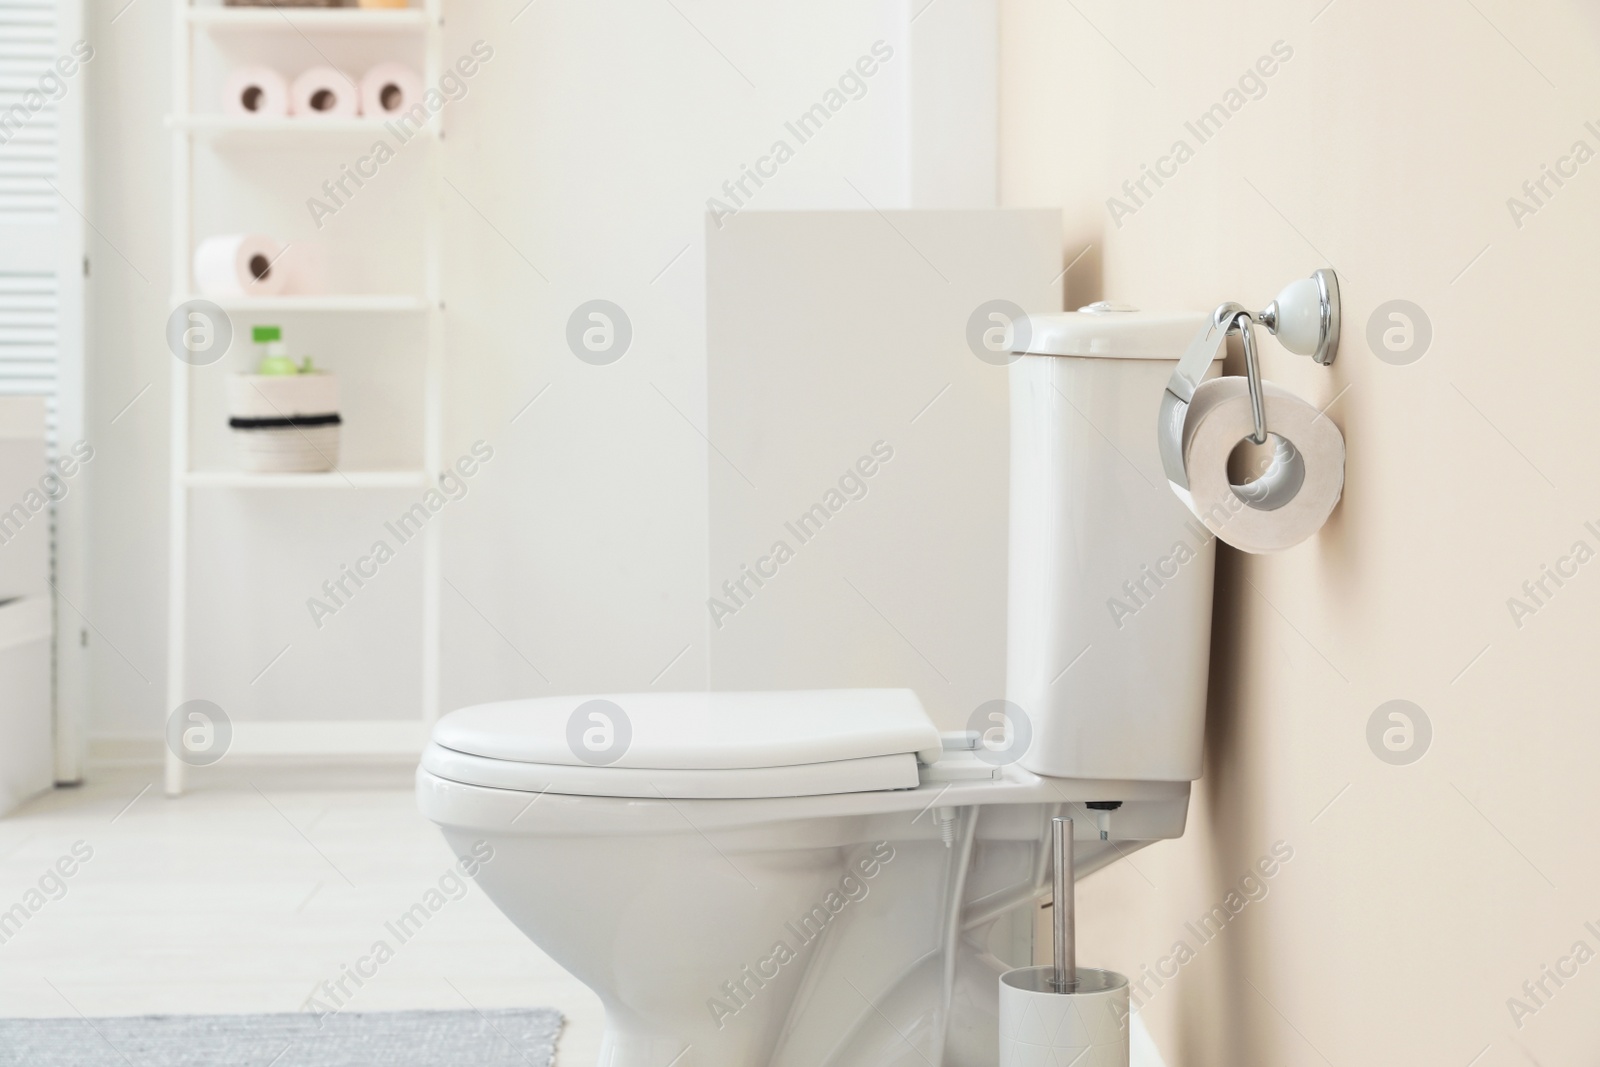 Photo of Holder with toilet paper roll on wall in bathroom